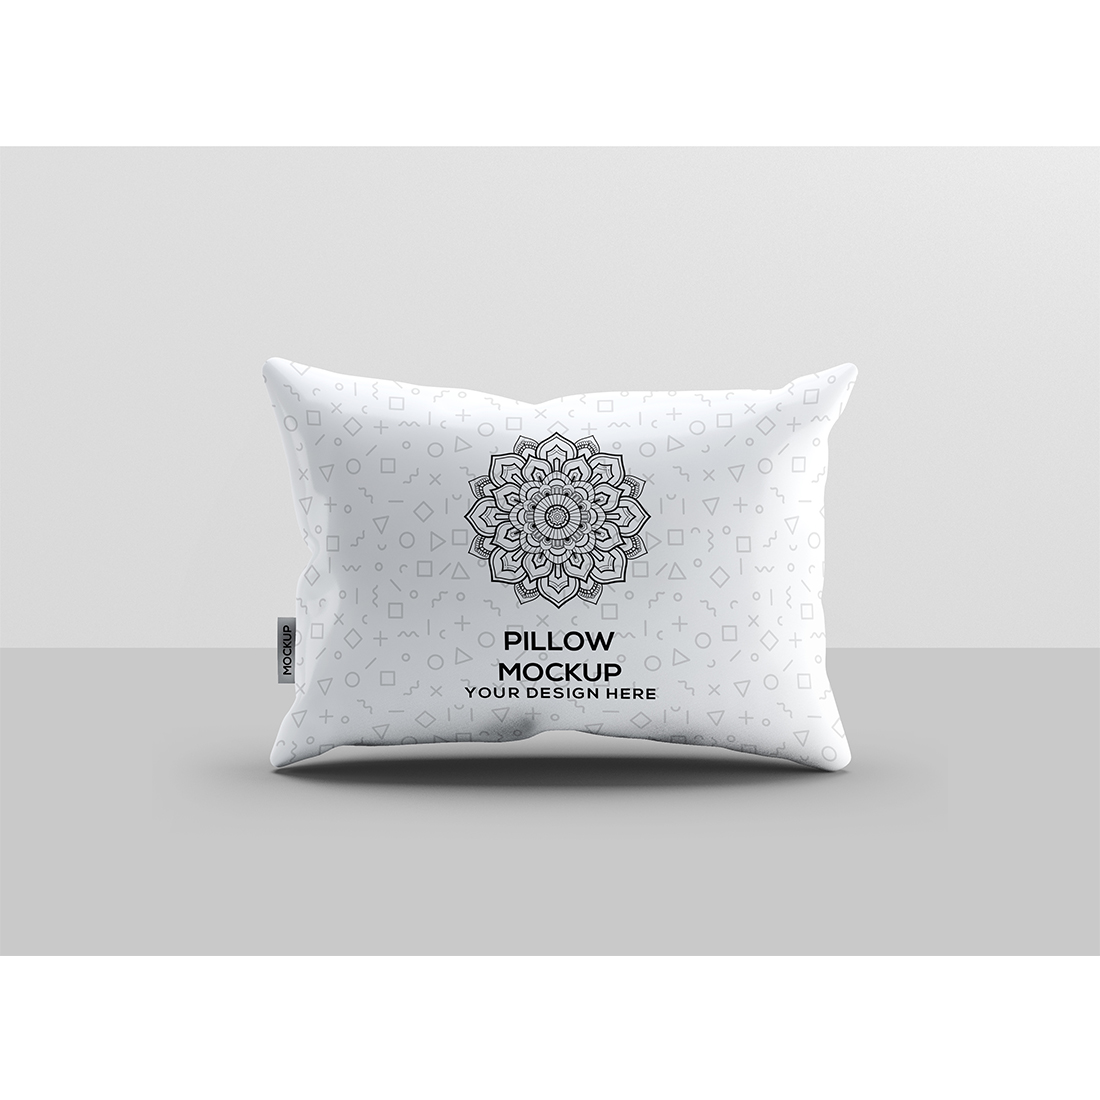 Fabric Pillow Mockup cover image.